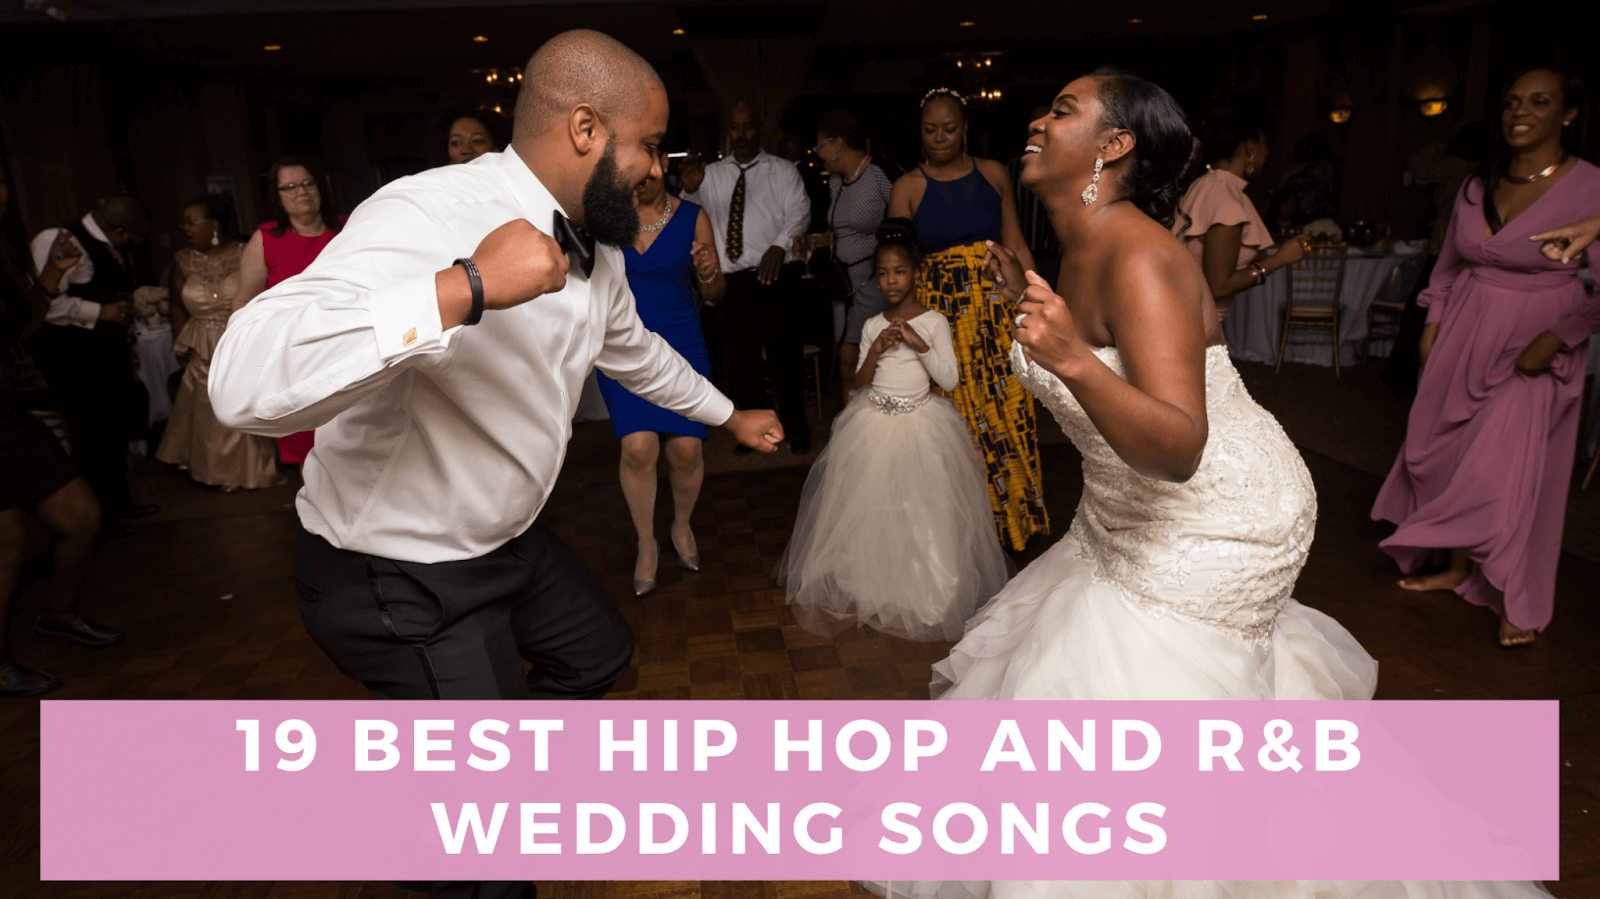 11 Best Queen Love Songs & Party Hits for a Wedding Playlist